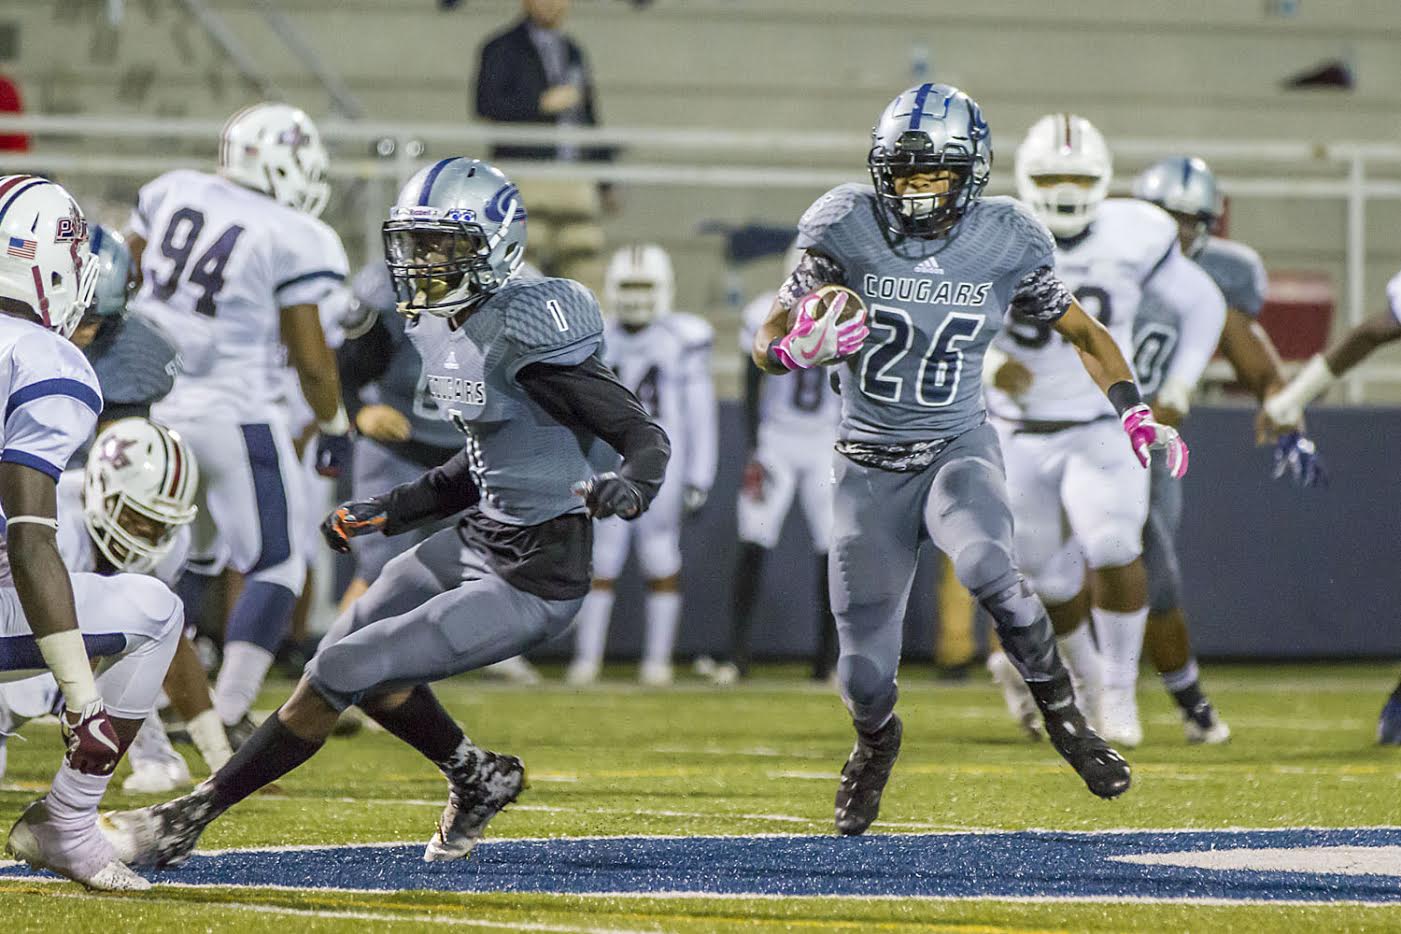 Park Crossing uses big plays to beat Cougars in Top-10 battle